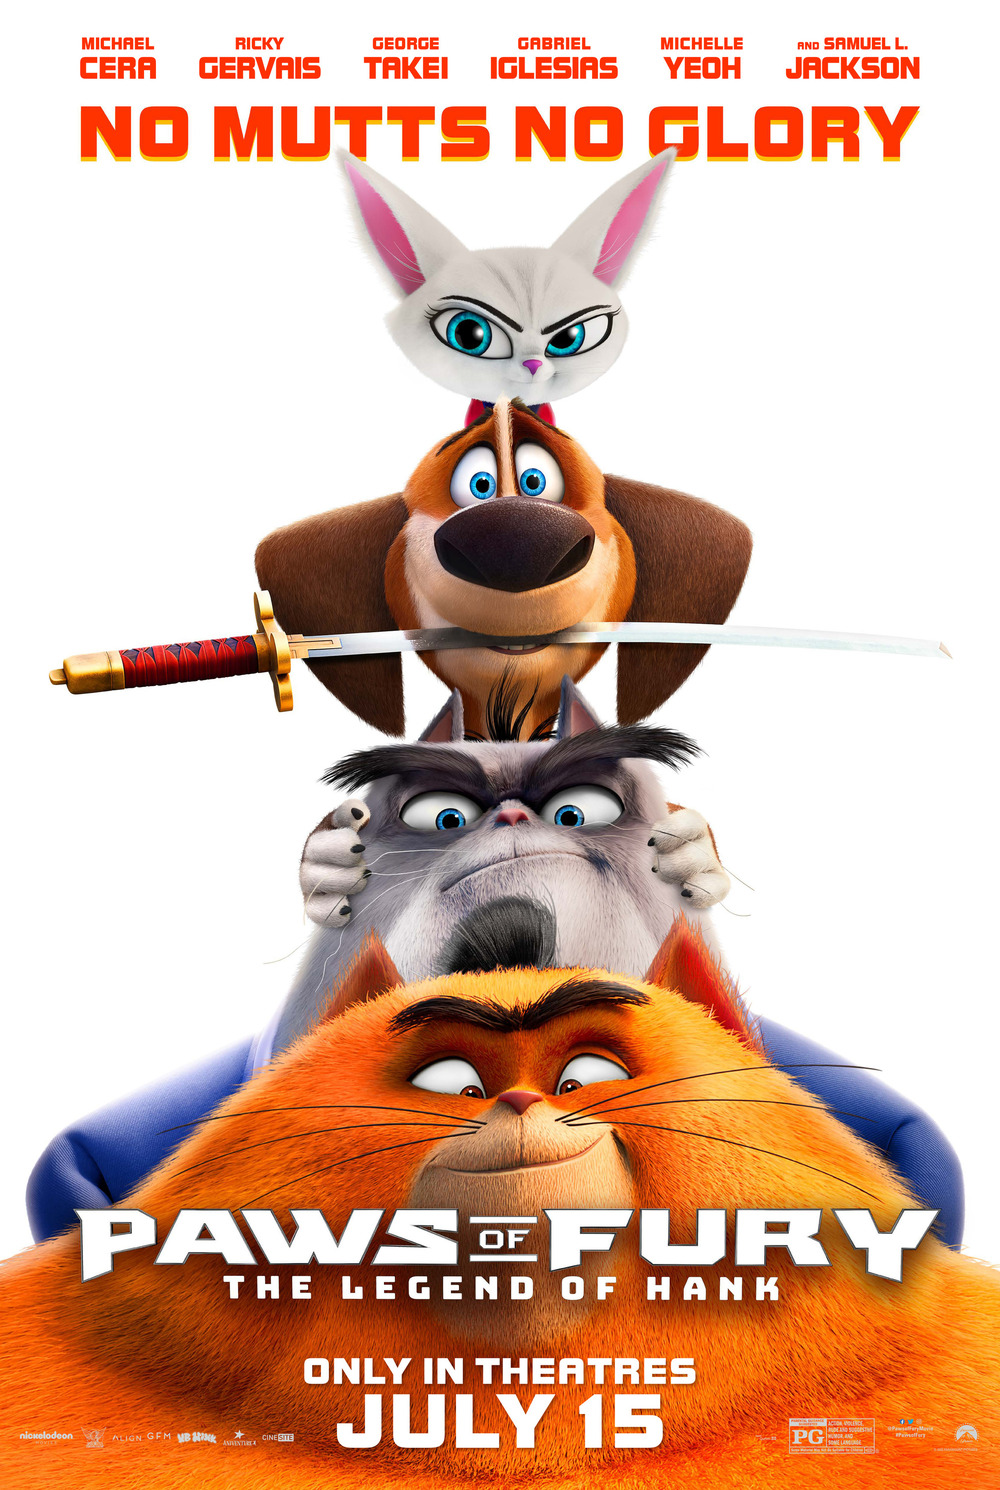 Paws Of Fury: The Legend Of Hank (blu-ray)(2022) : Target